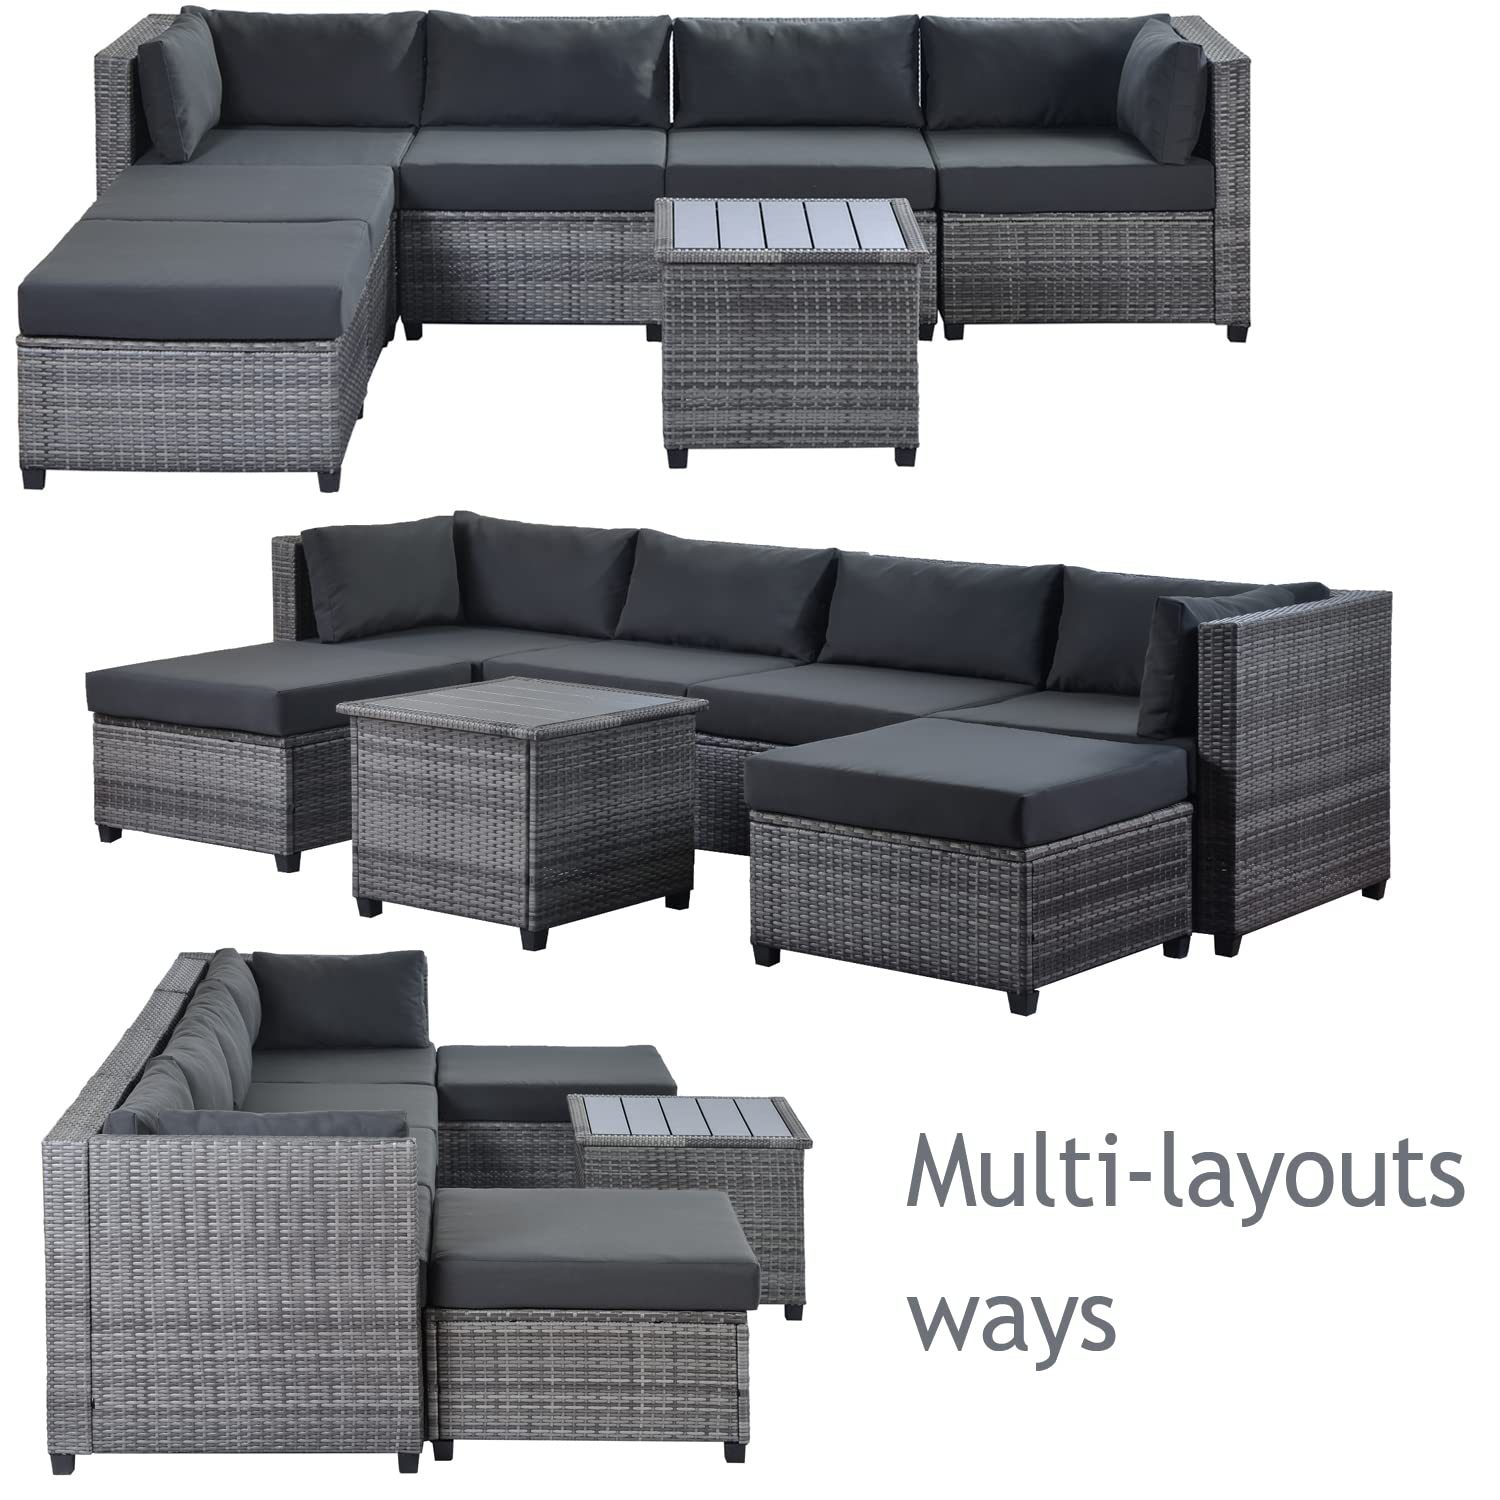 Outdoor Outside Rattan Backyard Wicker Patio Sectional Furniture Couch Set